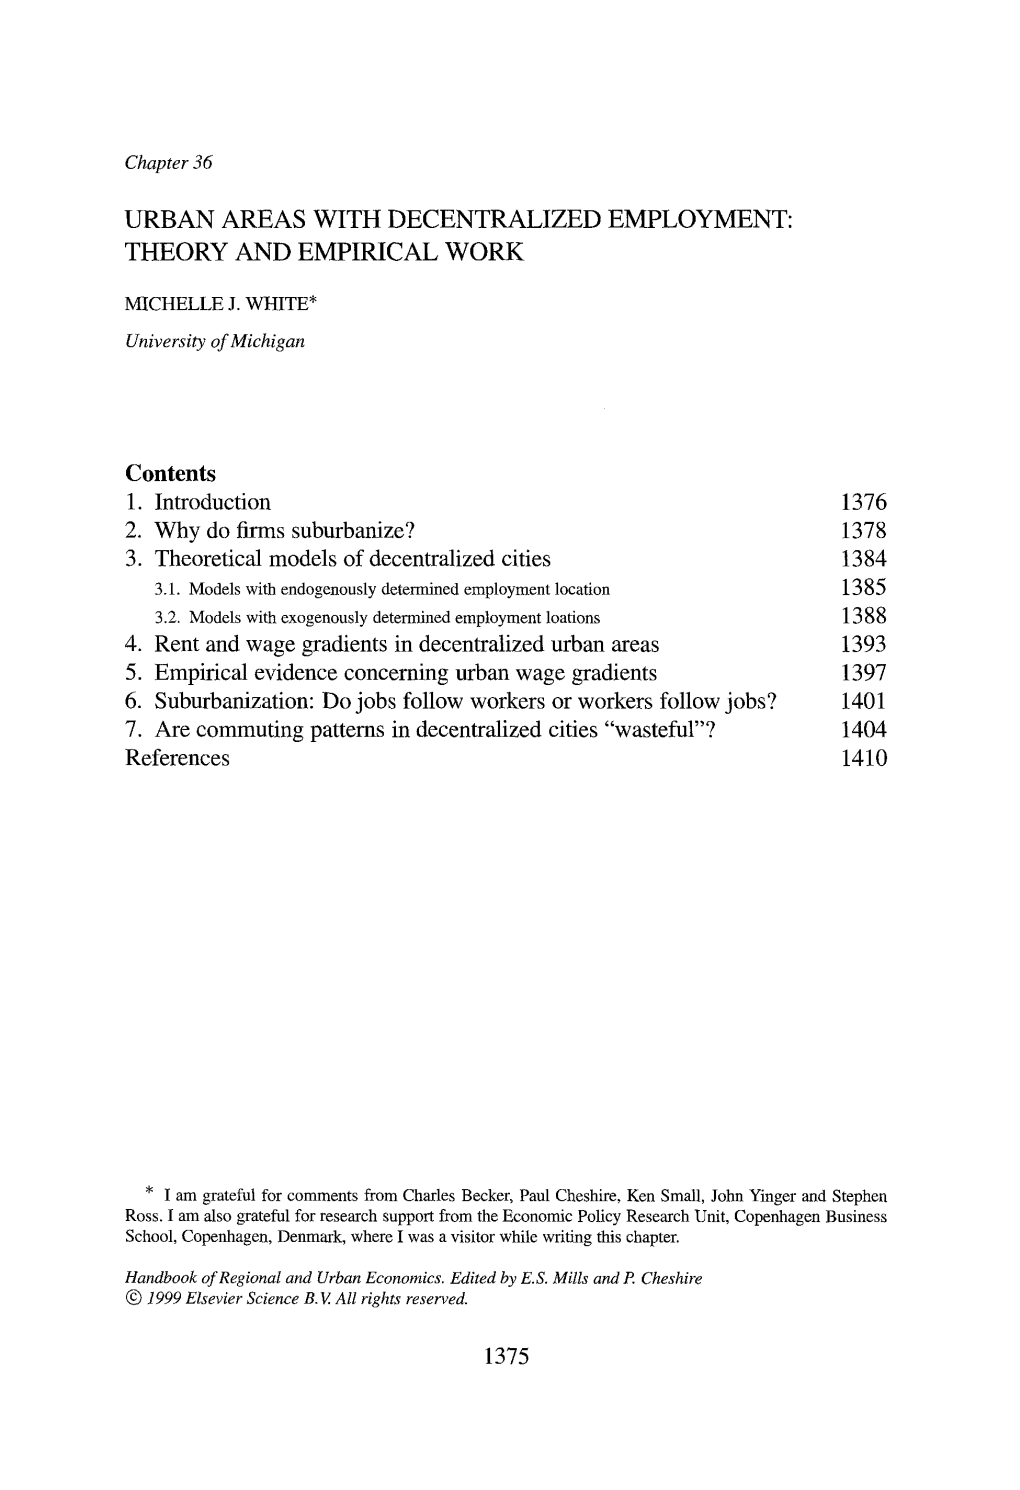 Urban Areas with Decentralized Employment: Theory and Empirical Work